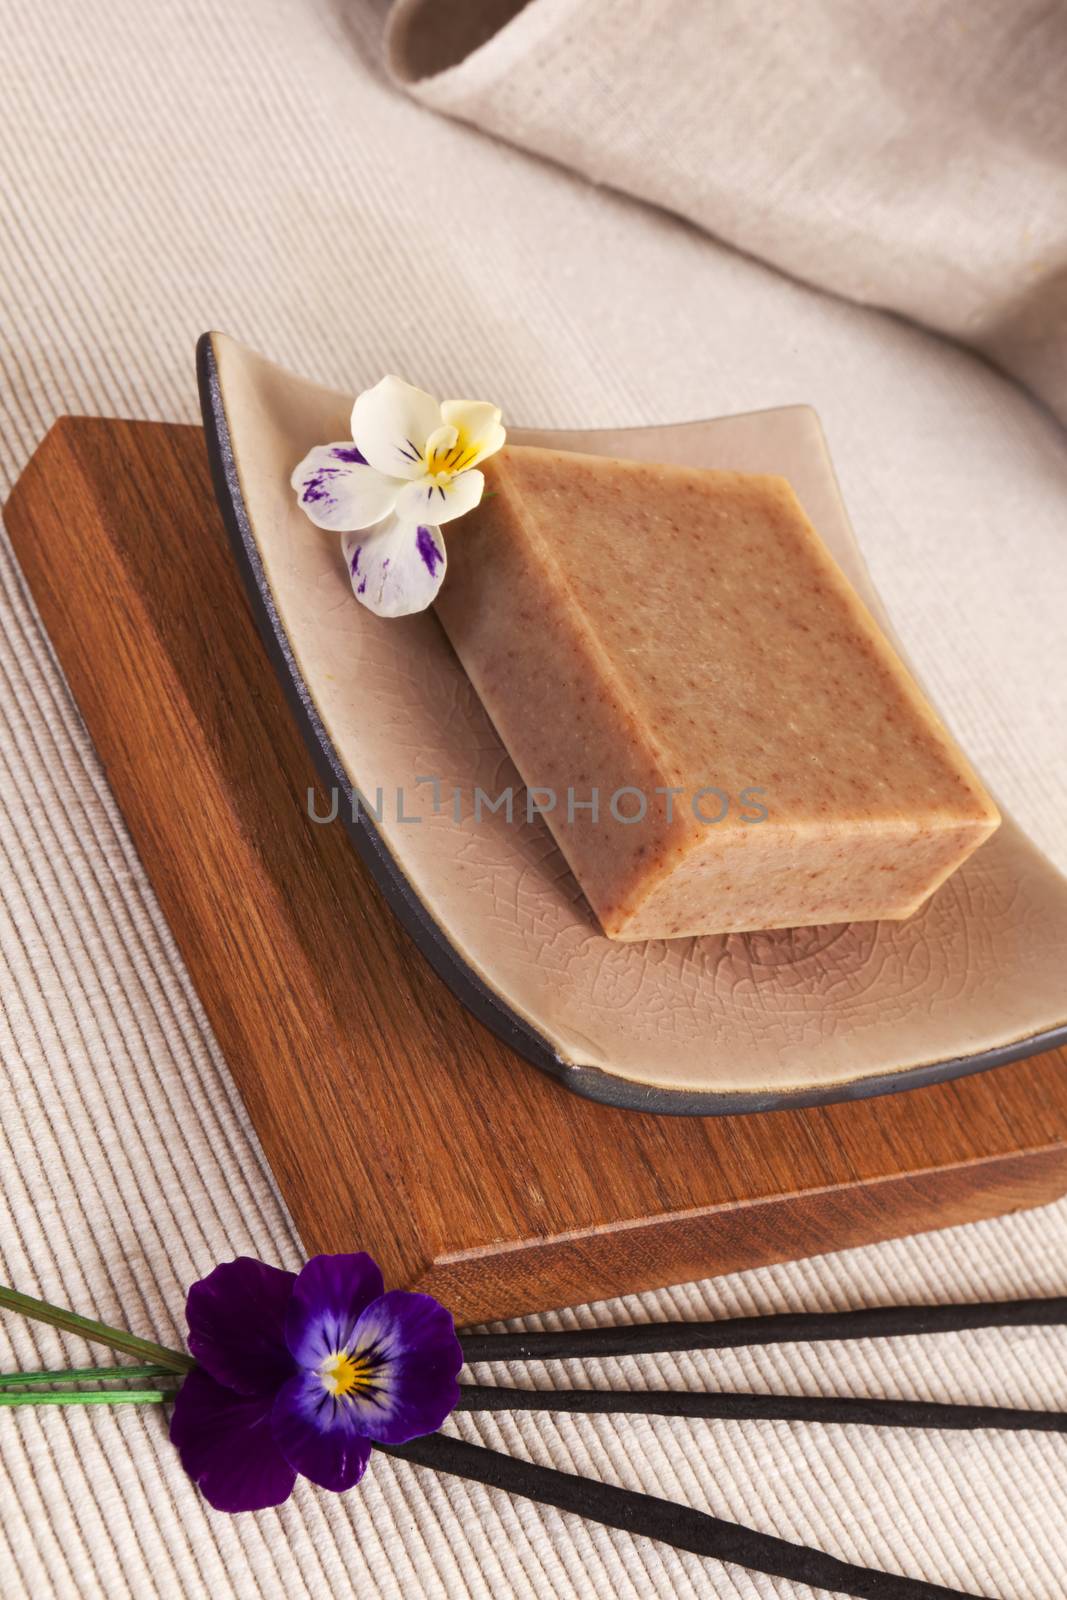 Spa still life with organic soap bar, flower blossom on a beautiful ceramics plate on wood.